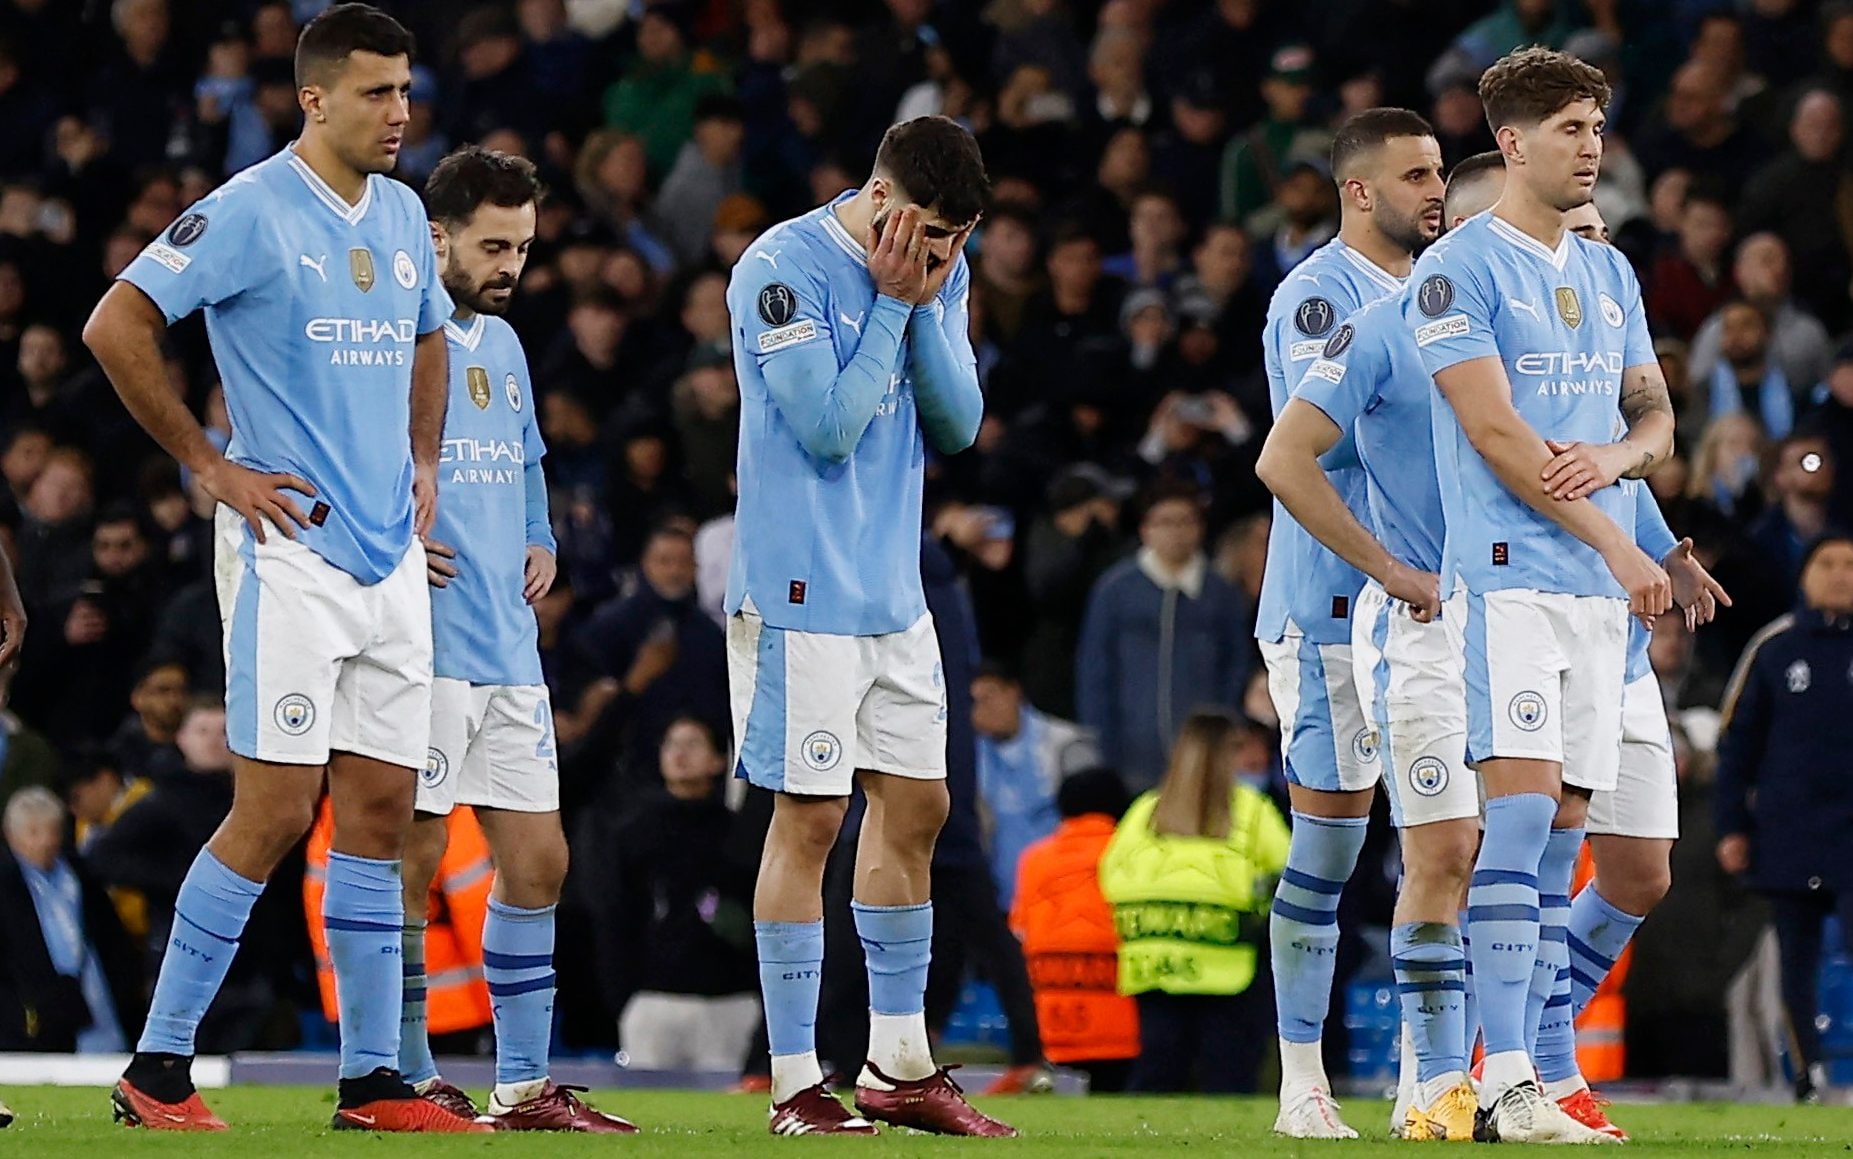 man city’s defeat was travesty – but champions league wipe-out is damaging for english football